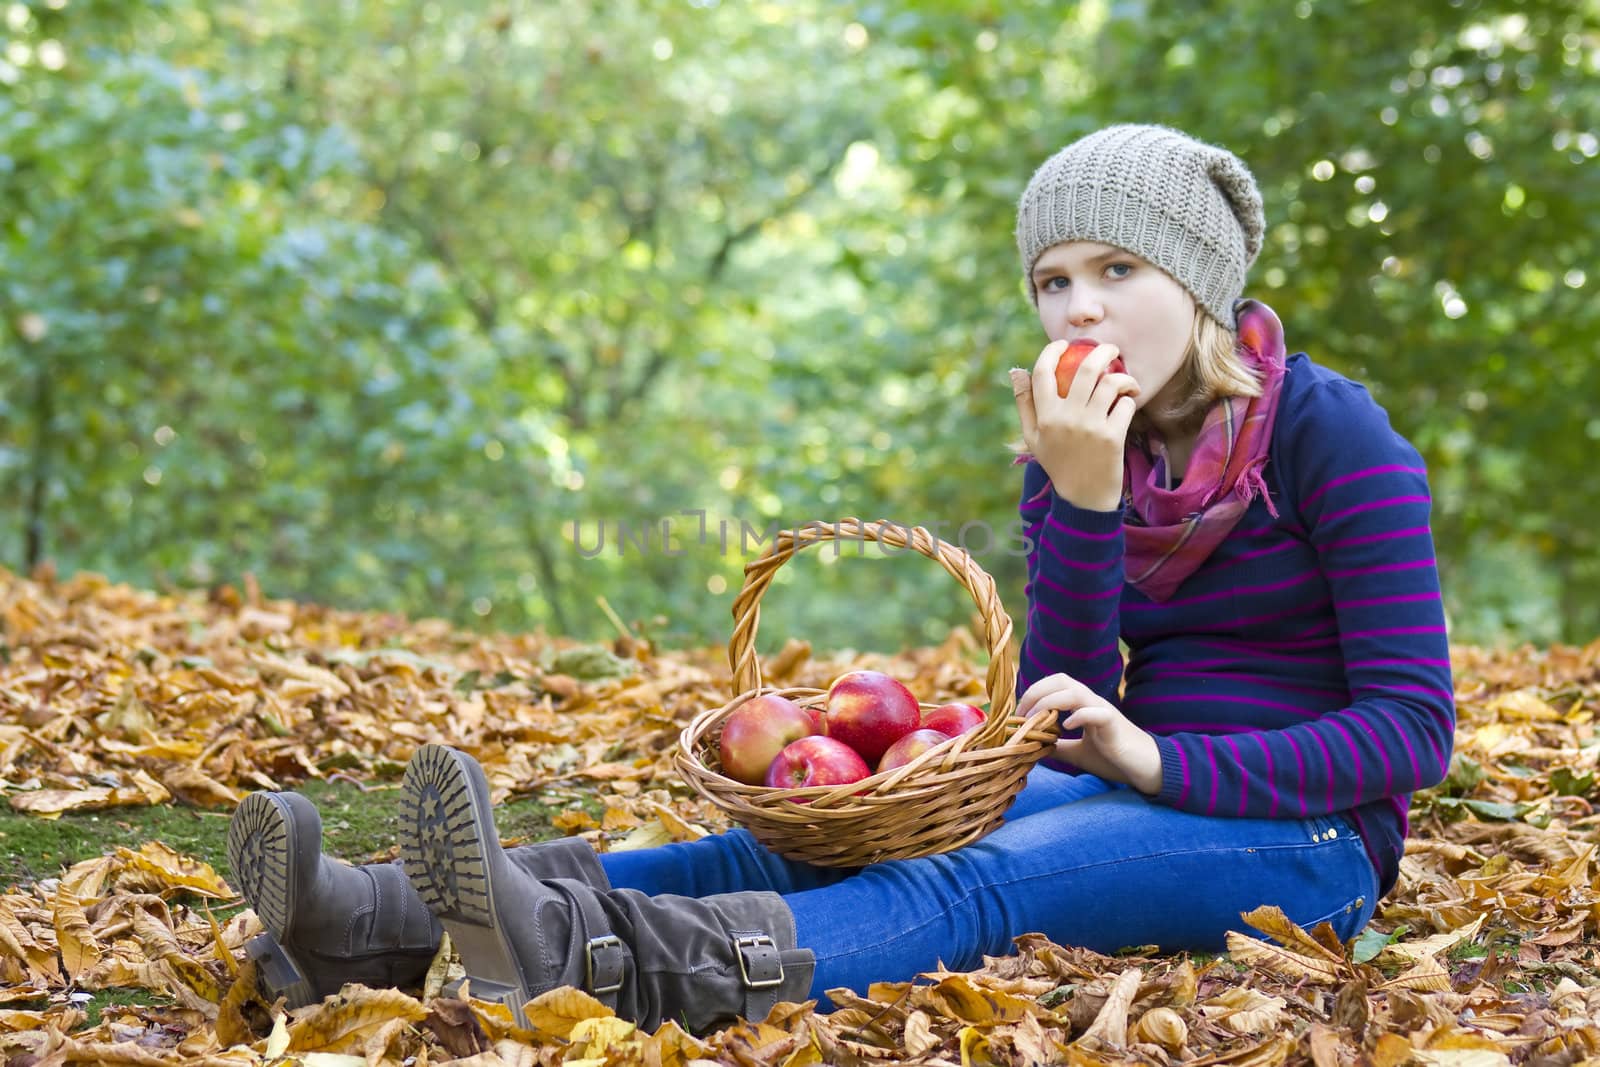 young girl eating red apple in autumn garden by miradrozdowski